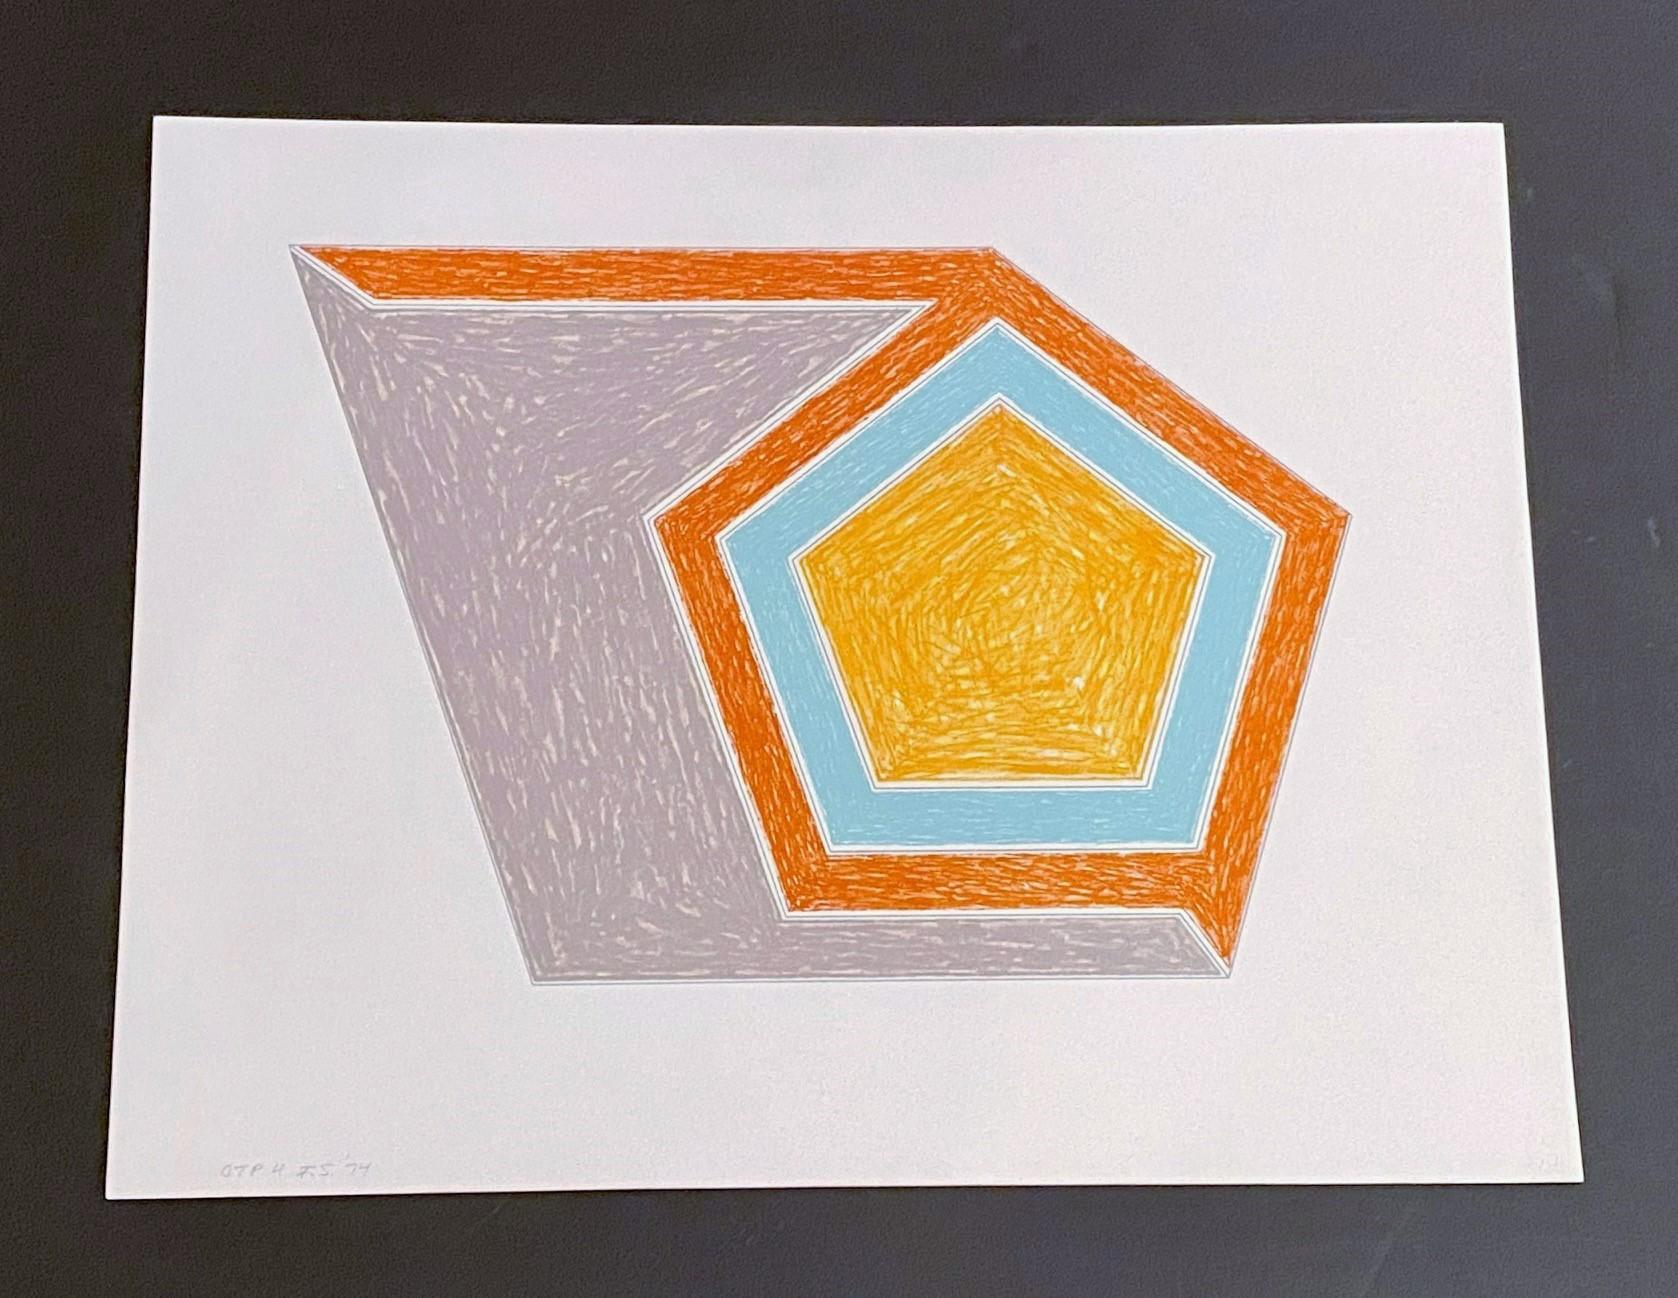 Ossipee (from 'Eccentric Polygons') - Print by Frank Stella